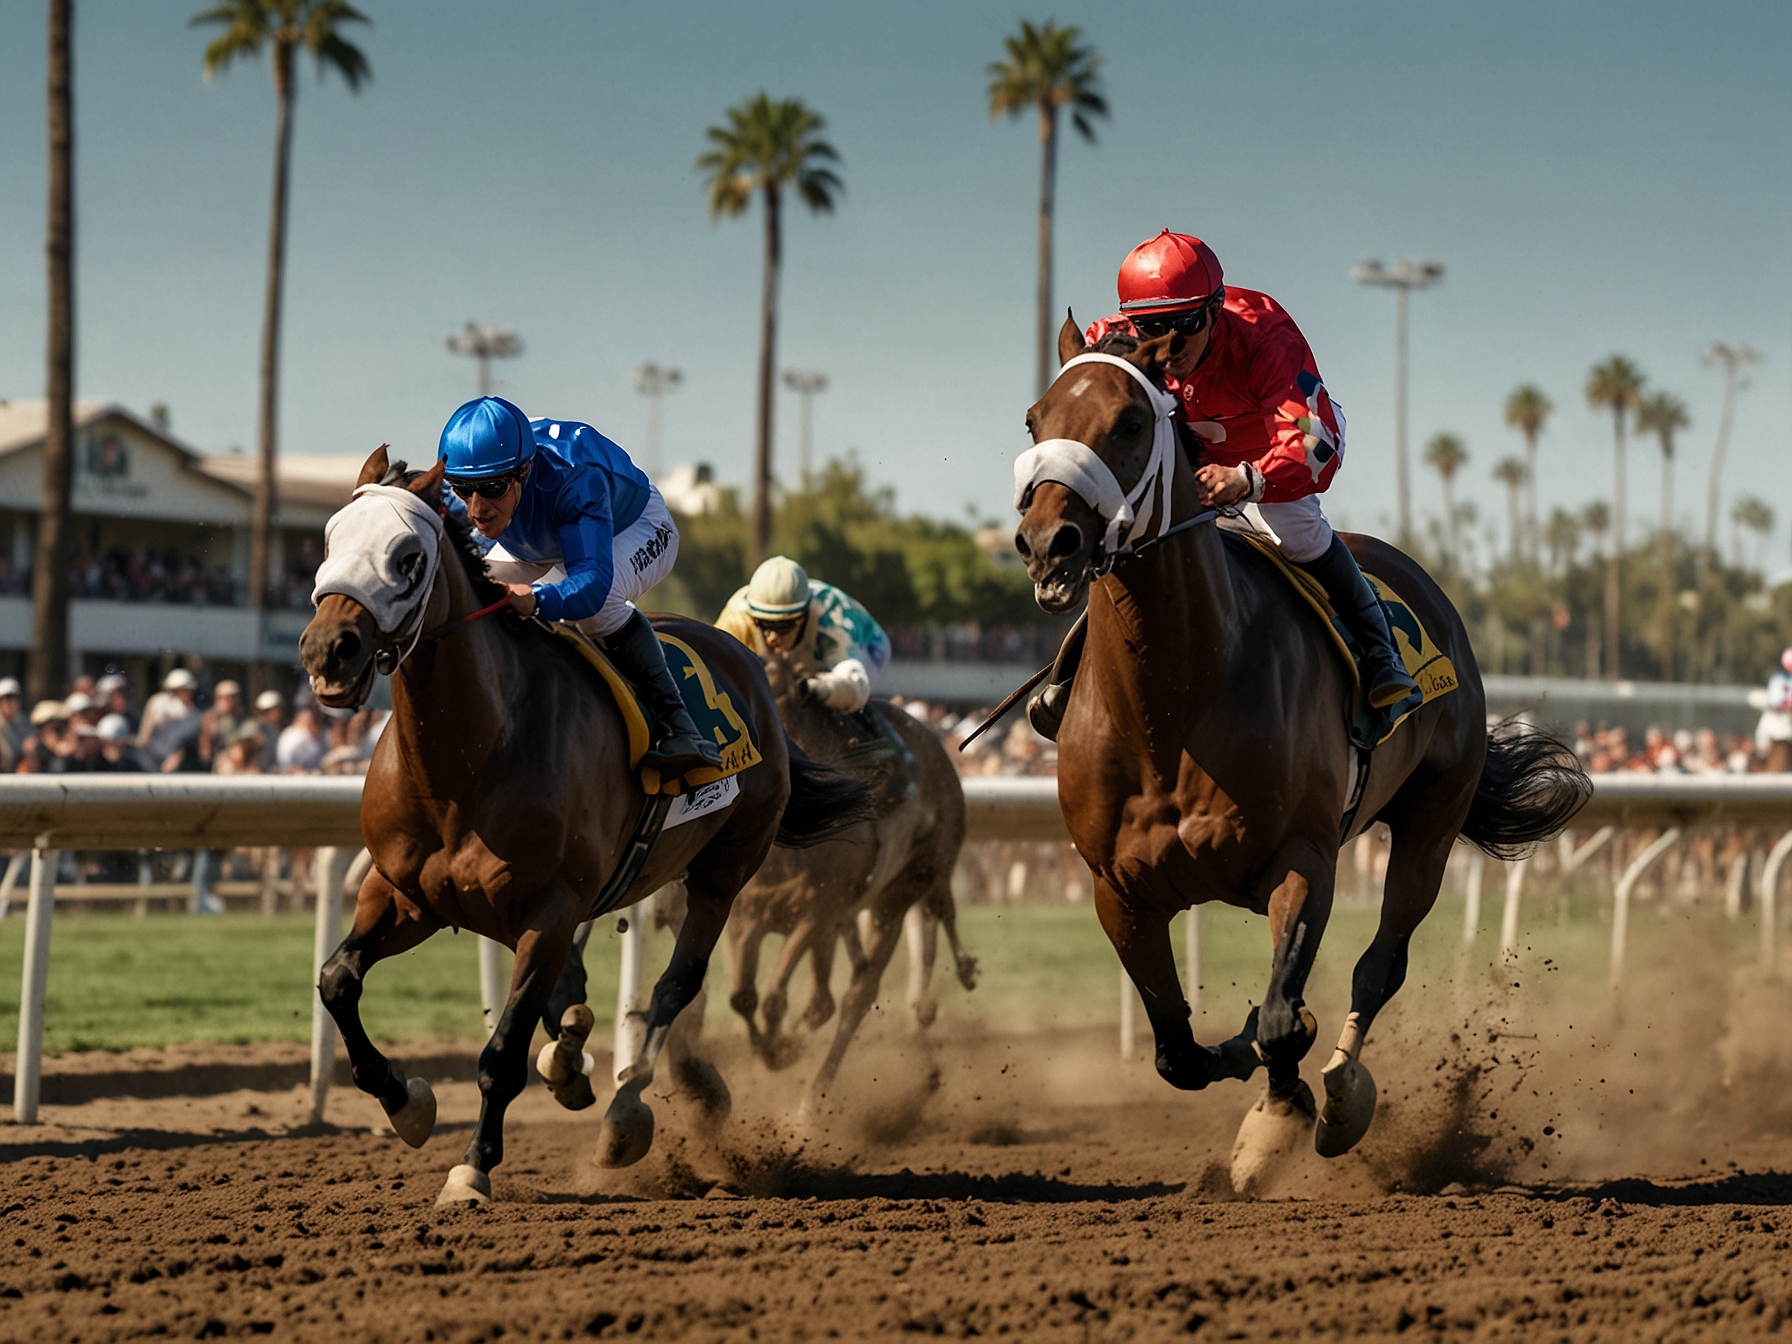 A dynamic scene of the Bertrando Stakes race at Los Alamitos, with Cowboy Mike in action, battling for the lead on a meticulously maintained track, amidst cheering fans and vibrant energy.